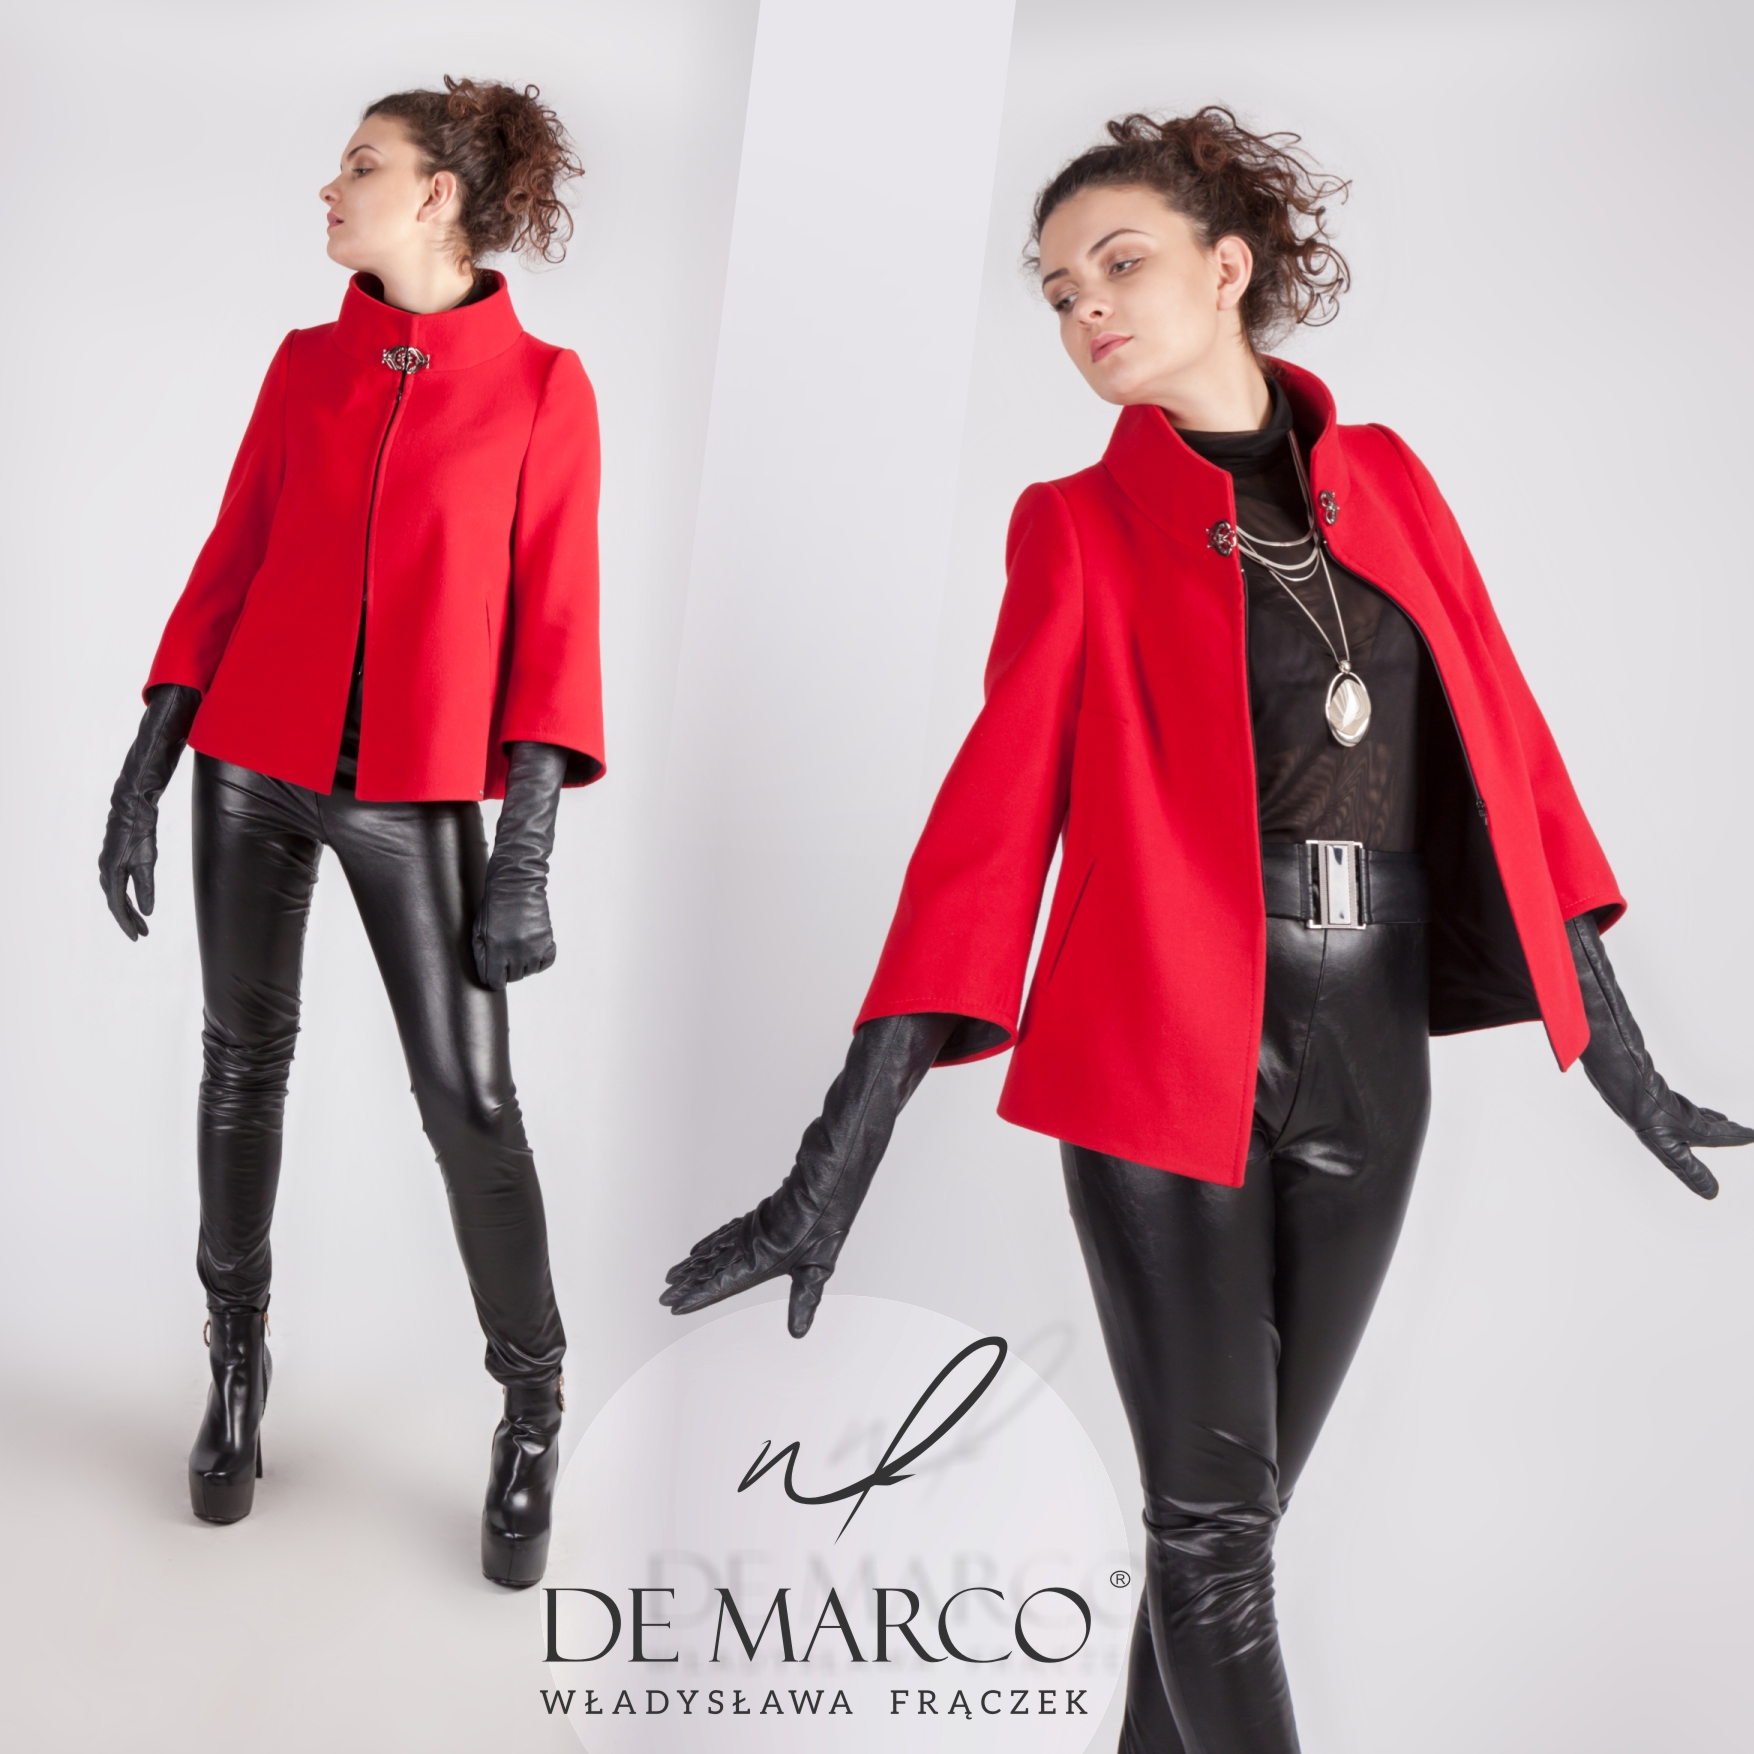 De Marco’s exclusive coat for the autumn-winter season Polish women’s coats in wool and cashmere